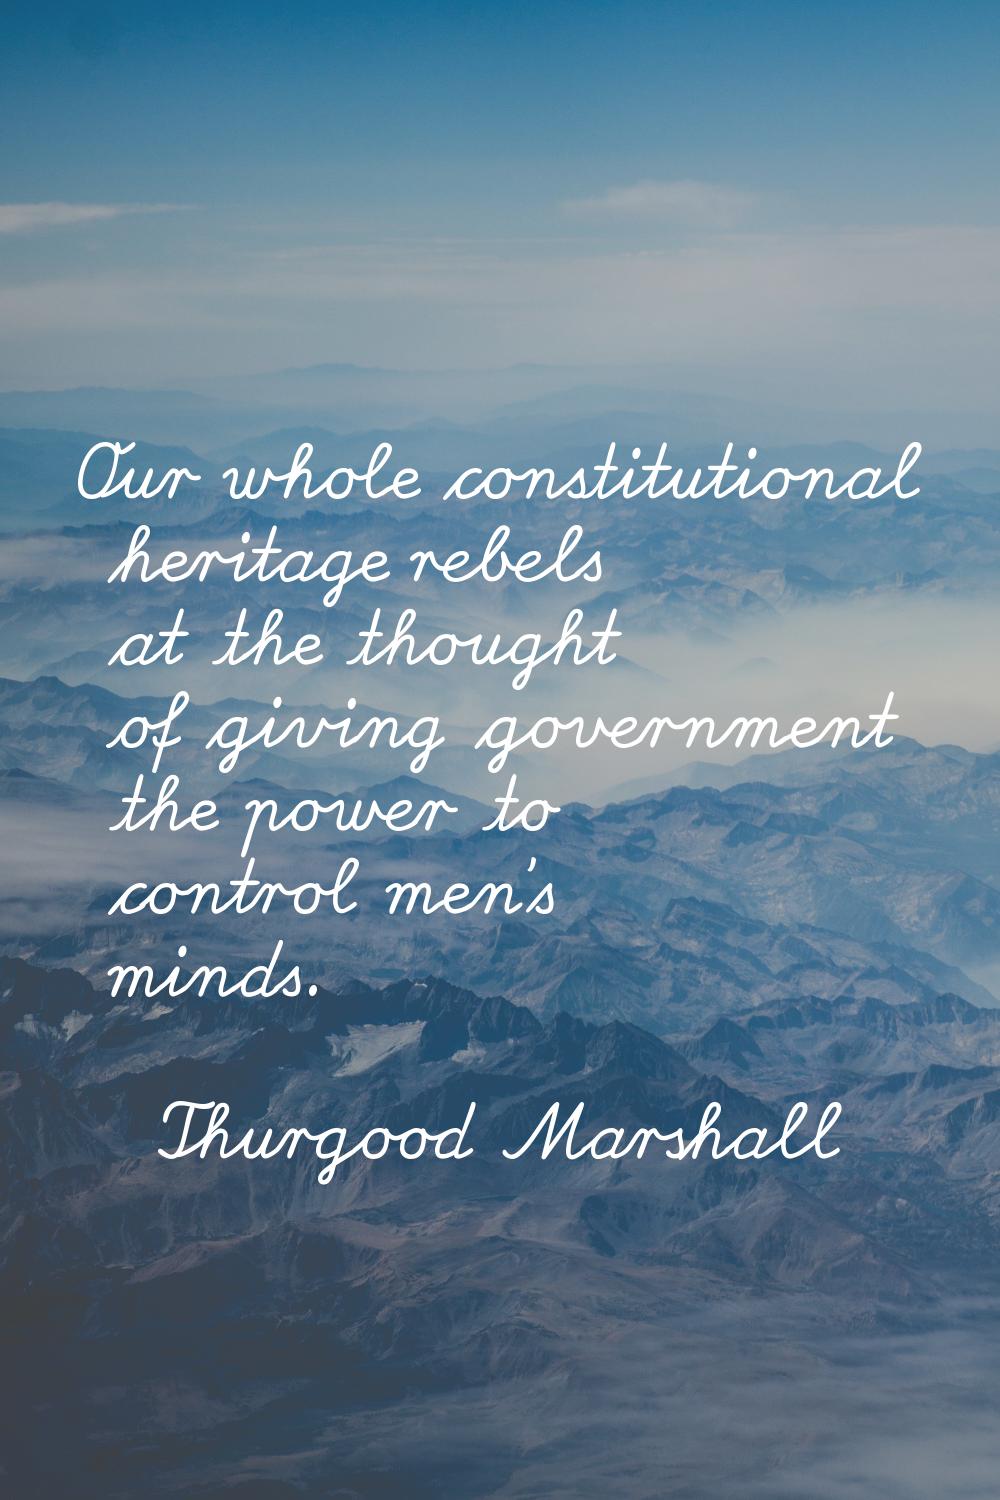 Our whole constitutional heritage rebels at the thought of giving government the power to control m